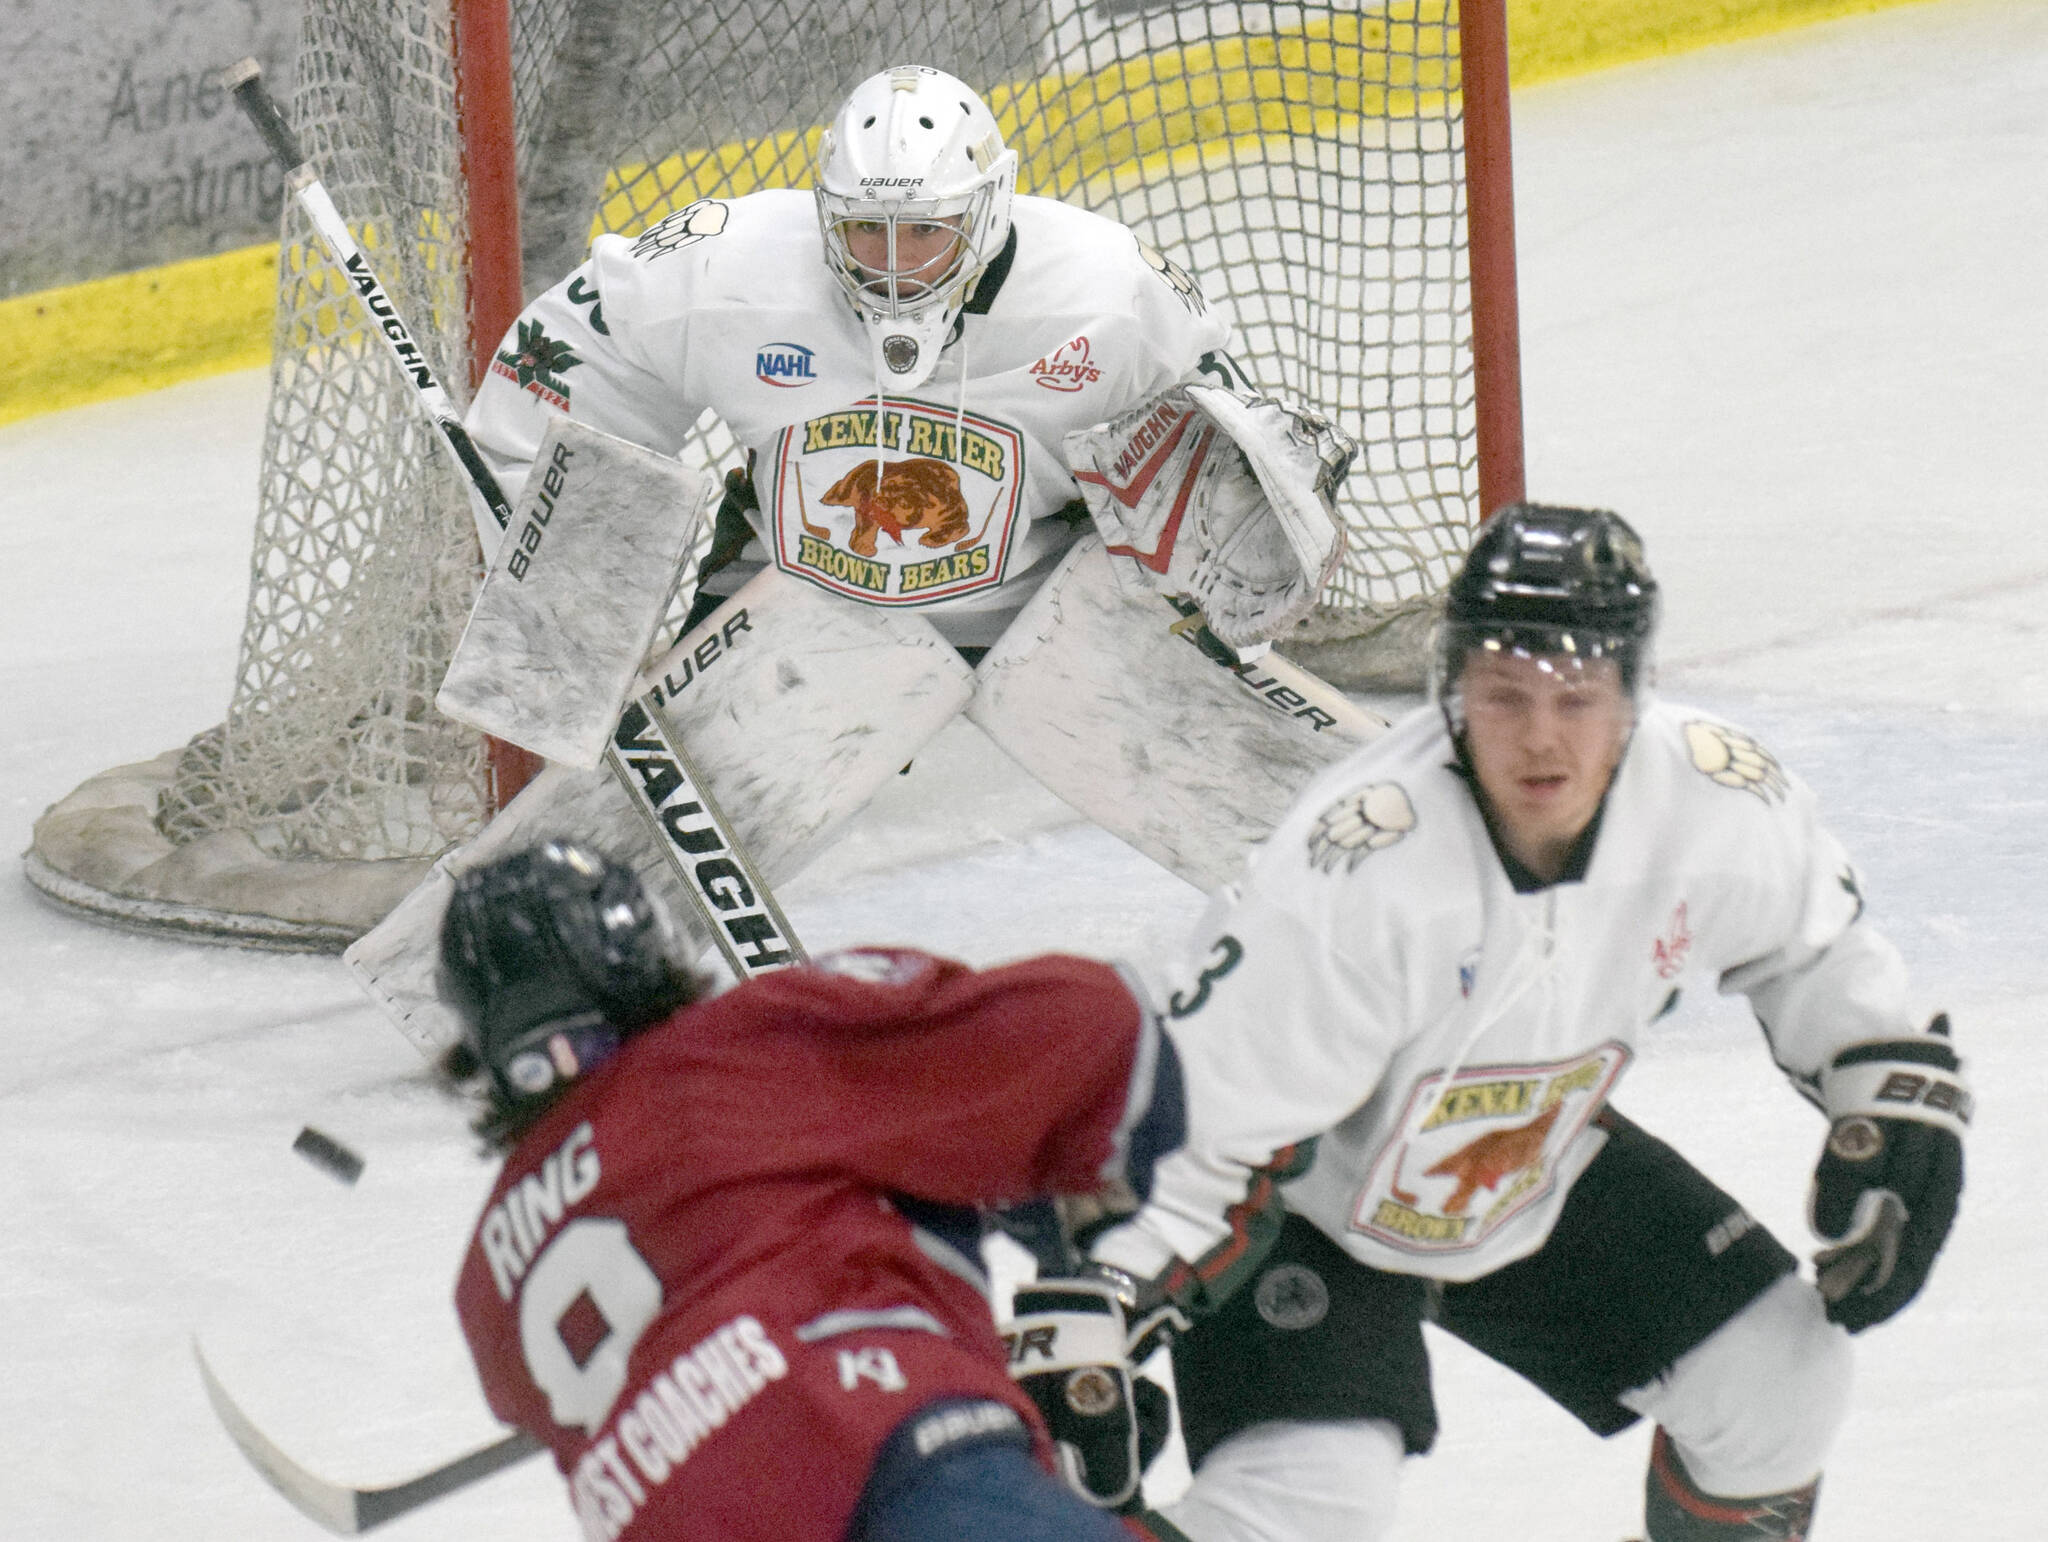 Kenai River Brown Bears goalie Bryant Marks saves a shot by Jack Ring of the Fairbanks Ice Dogs on Friday, March 12, 2022, at the Soldotna Regional Sports Complex in Soldotna, Alaska. (Photo by Jeff Helminiak/Peninsula Clarion)